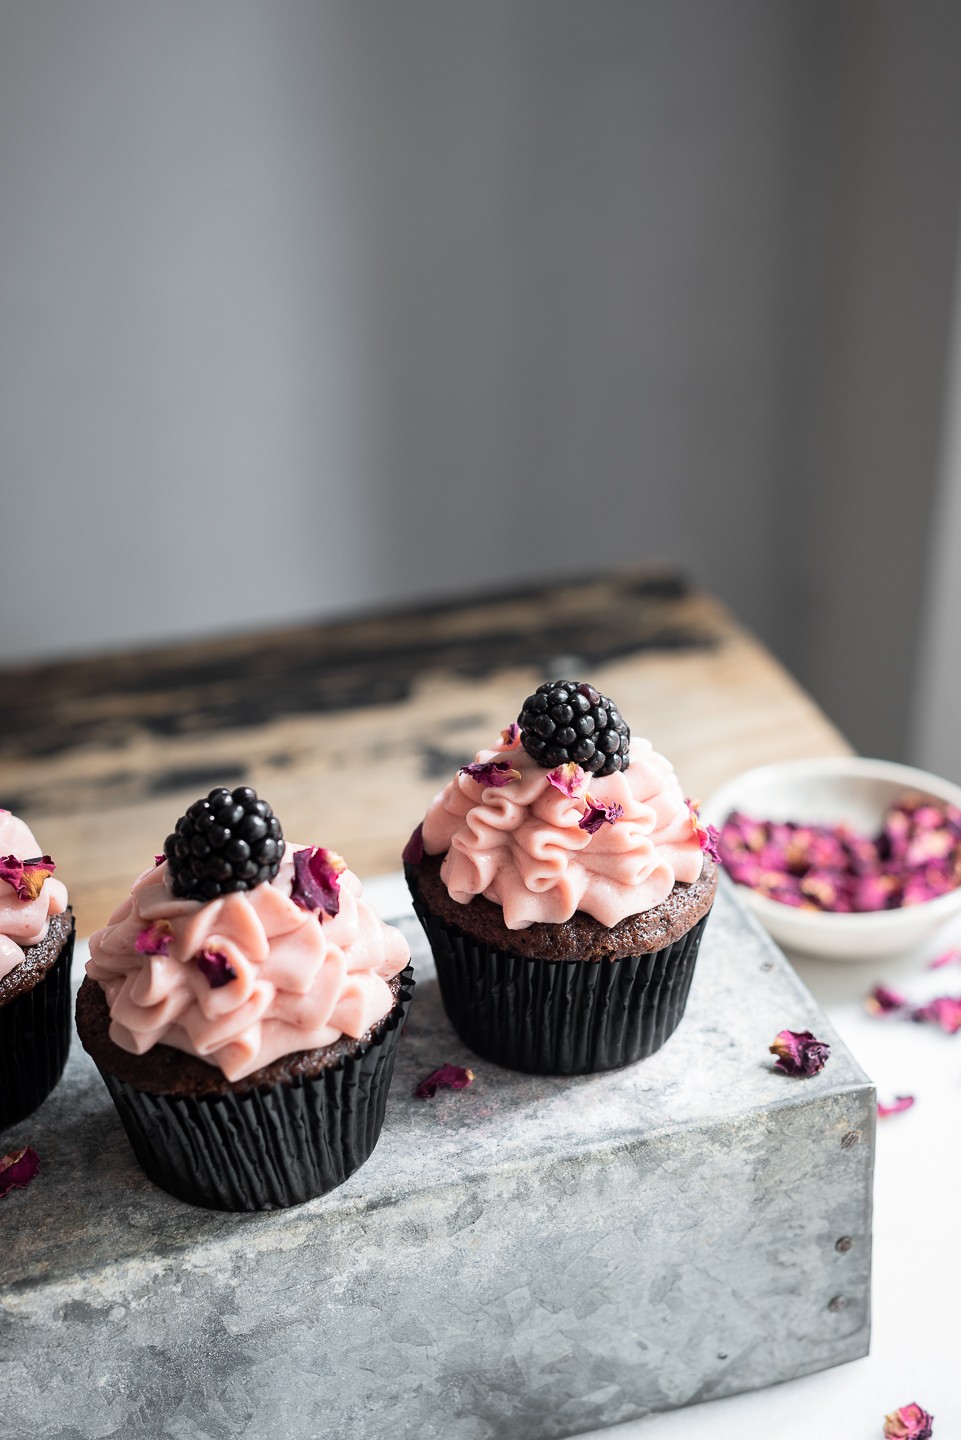 Frilled devil's food cupcakes | Bibby's Kitchen recipes | Baking